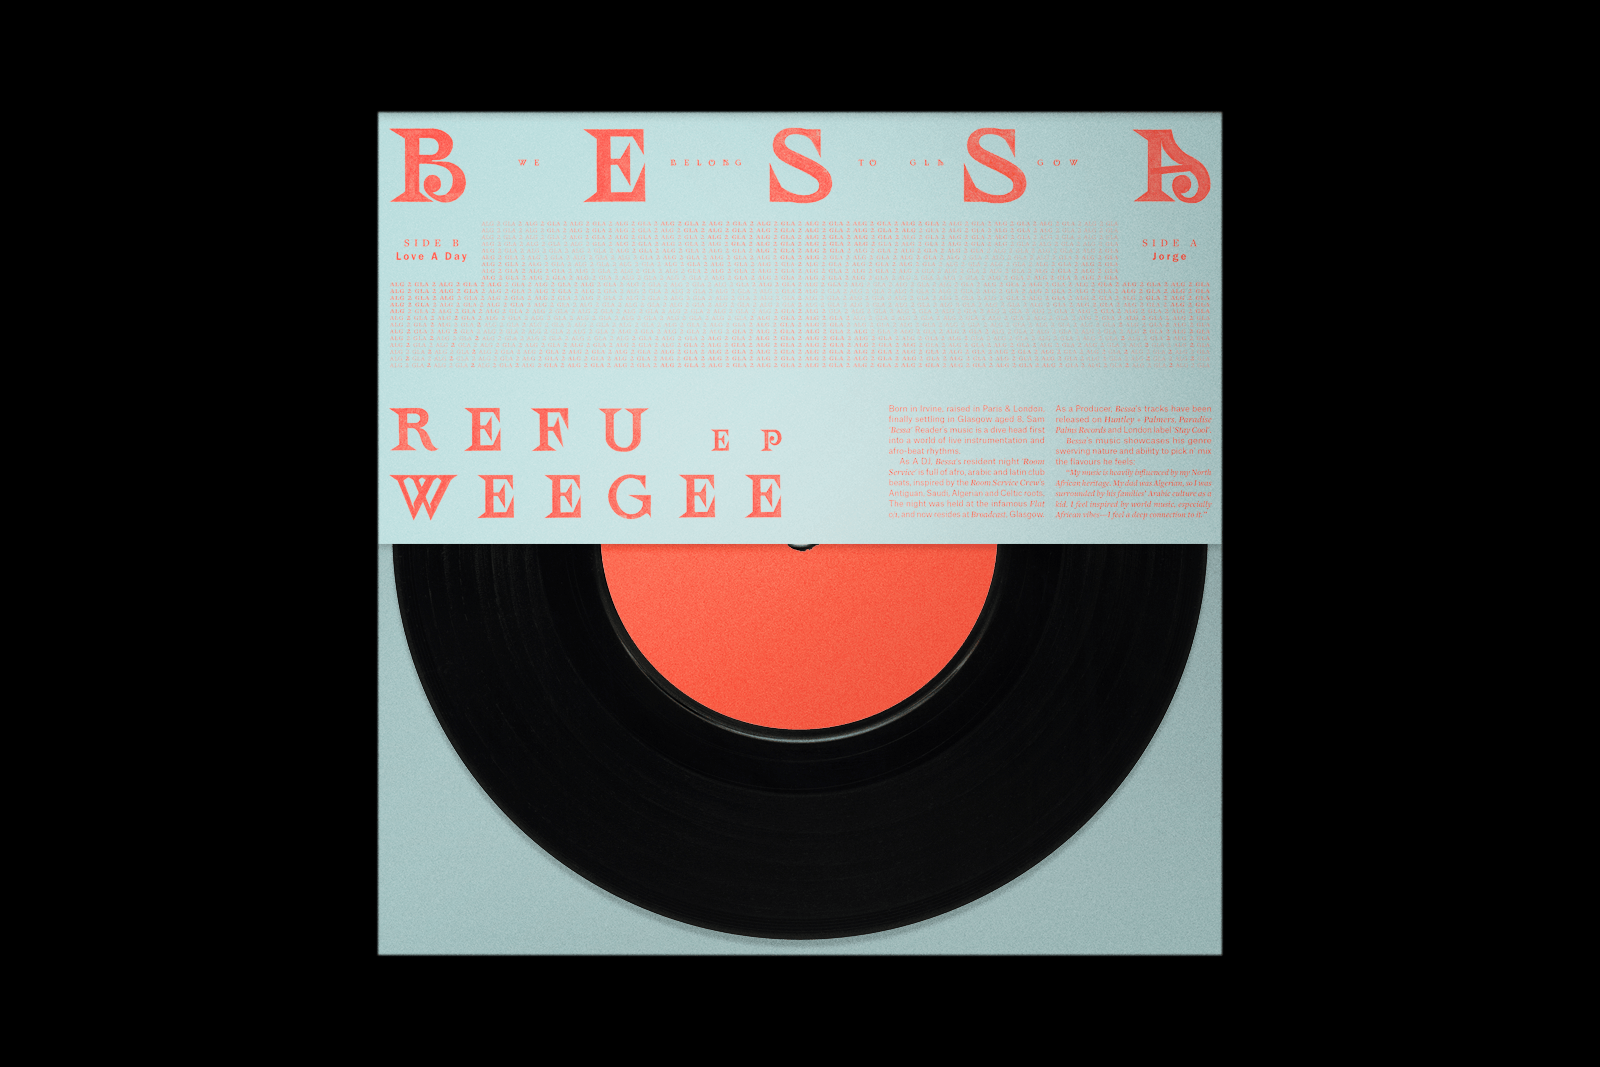 Bessa Refuweegee 7" record sleeve back cover by O Street, Glasgow